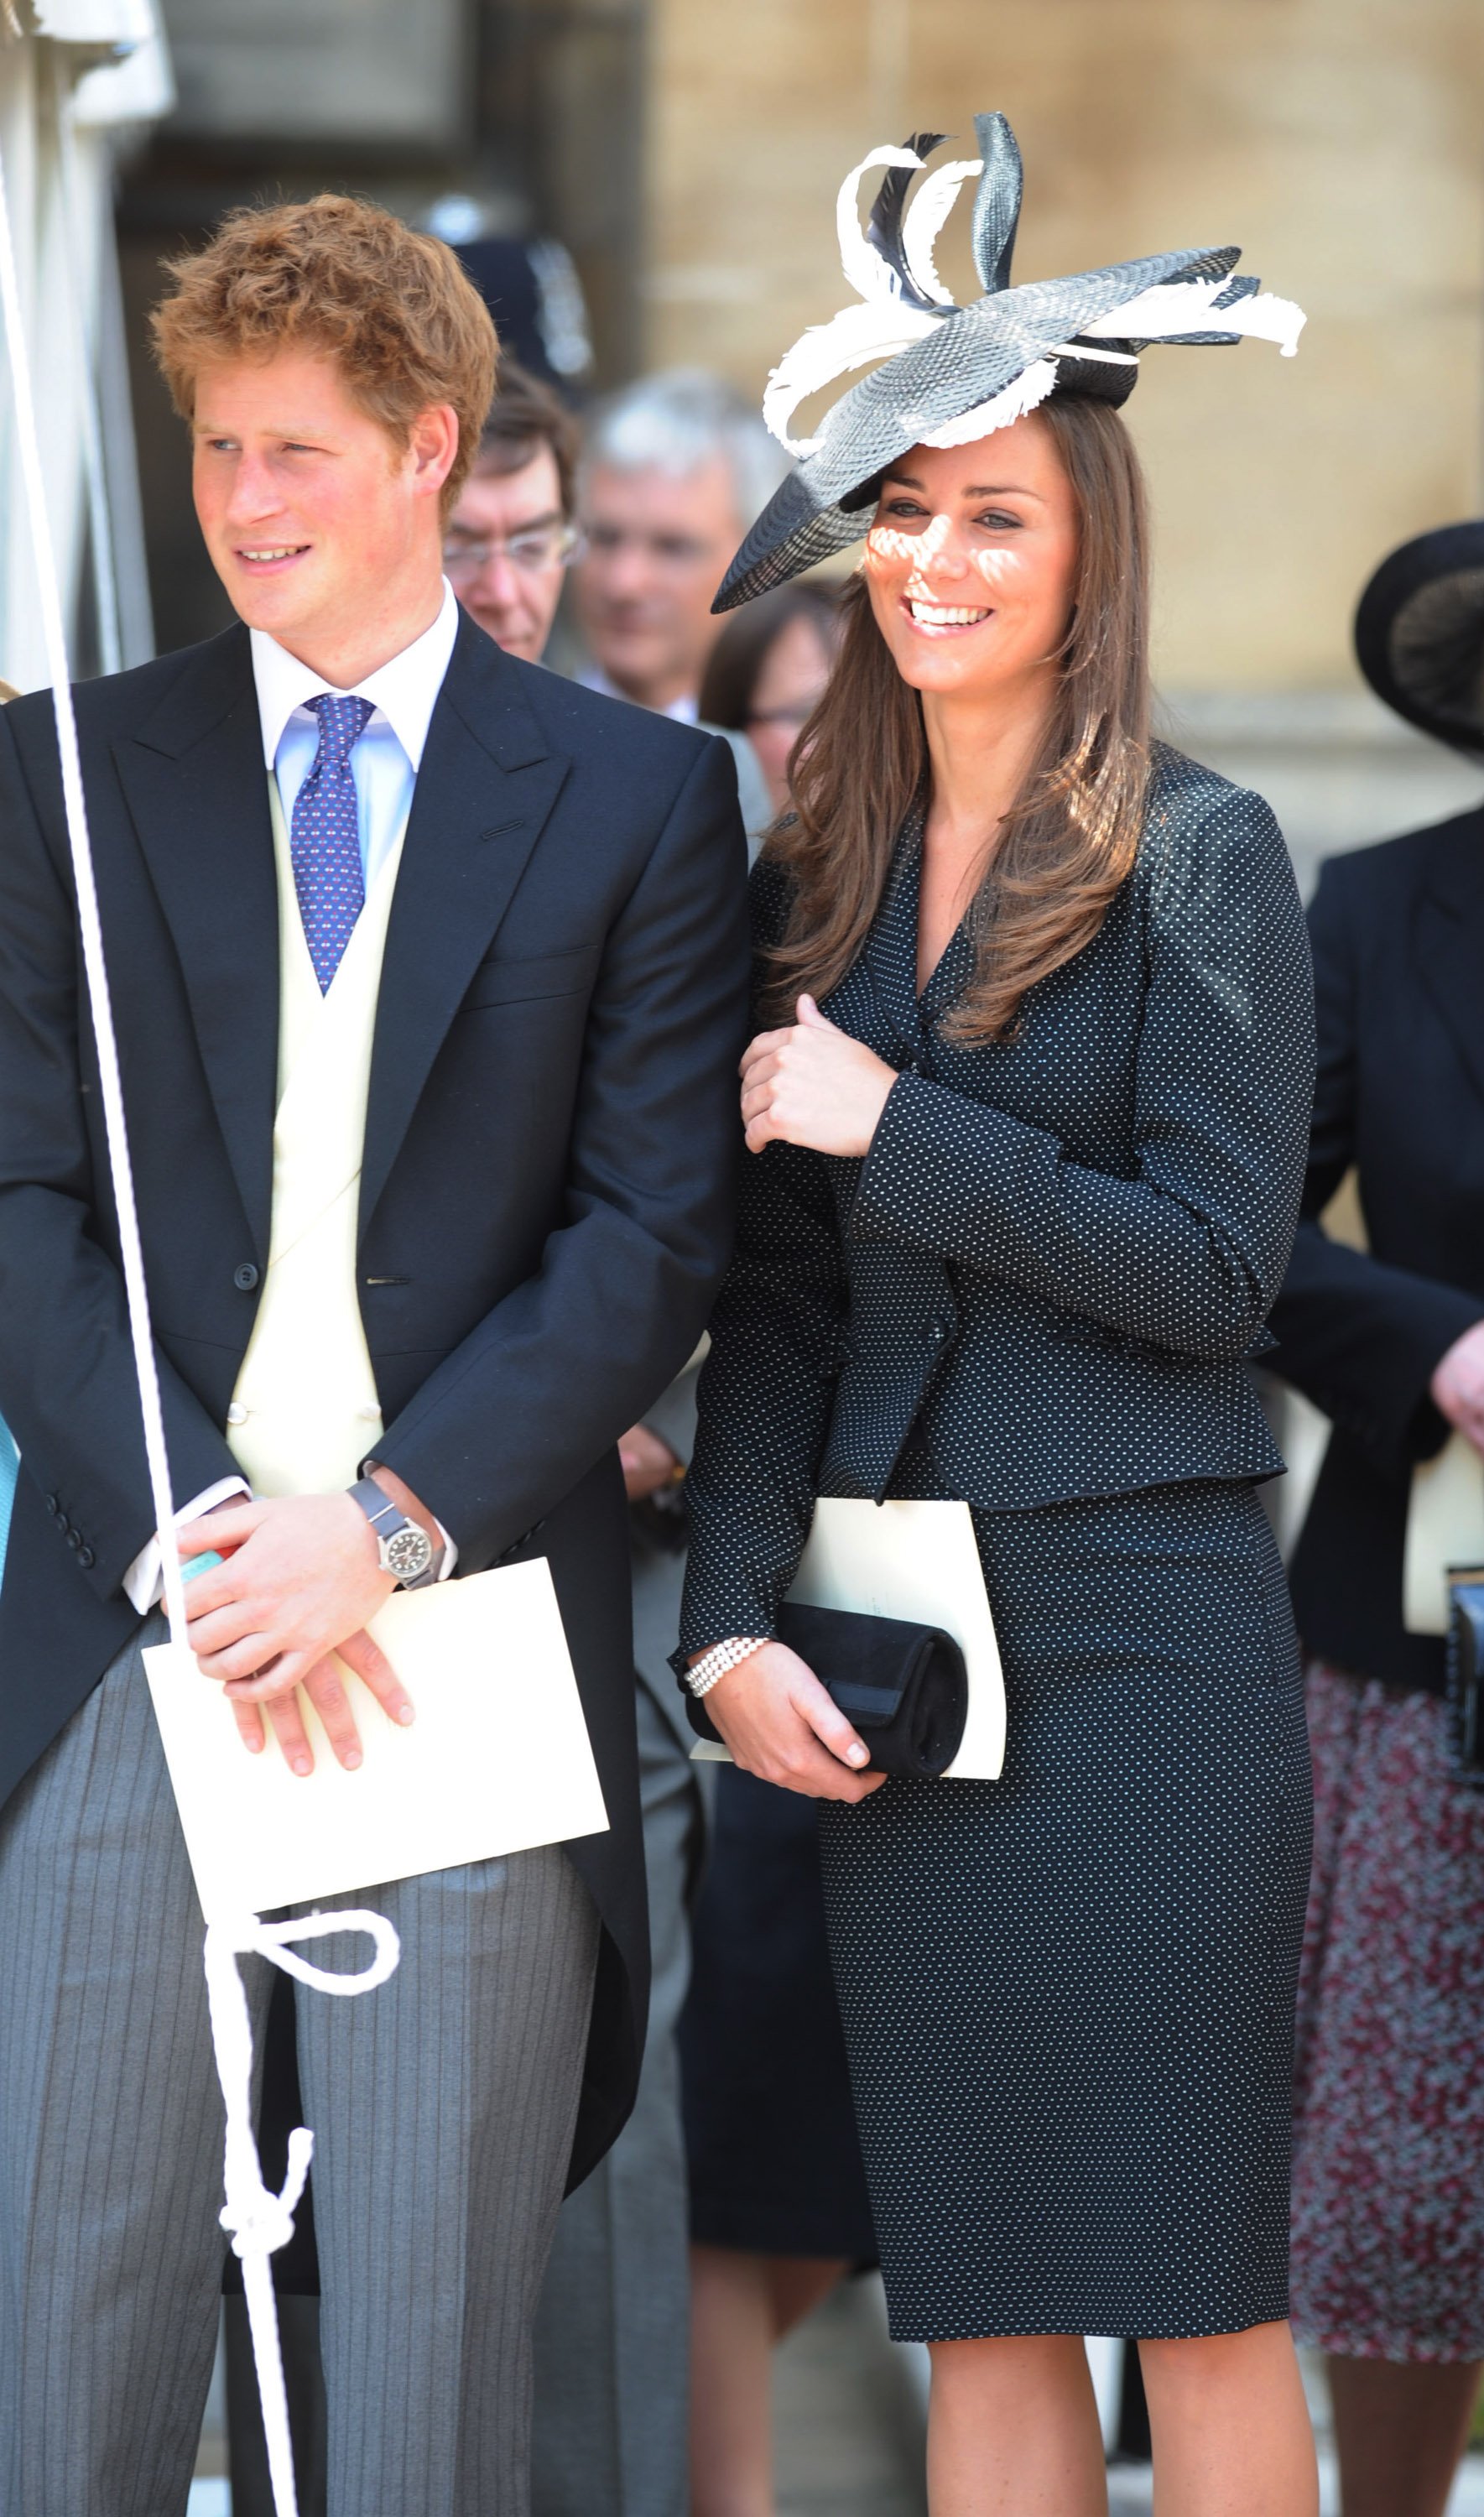 Prince Harry and Kate Middleton watch the Order of the Garter procession at Windsor Castle on June 16, 2008, in Windsor, England | Source: Getty Images